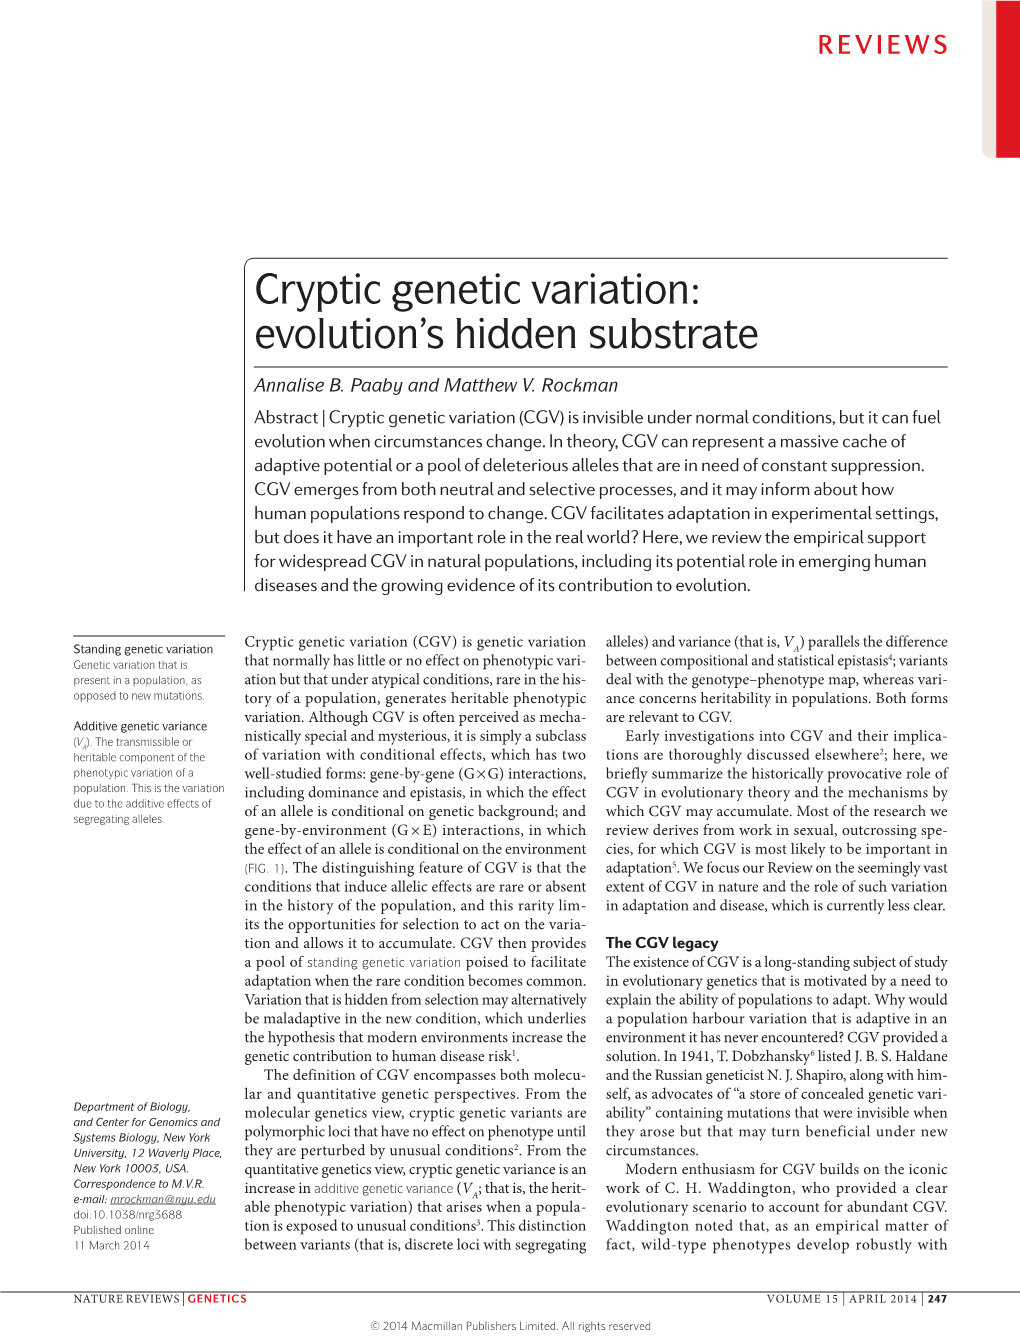 Cryptic Genetic Variation: Evolution's Hidden Substrate